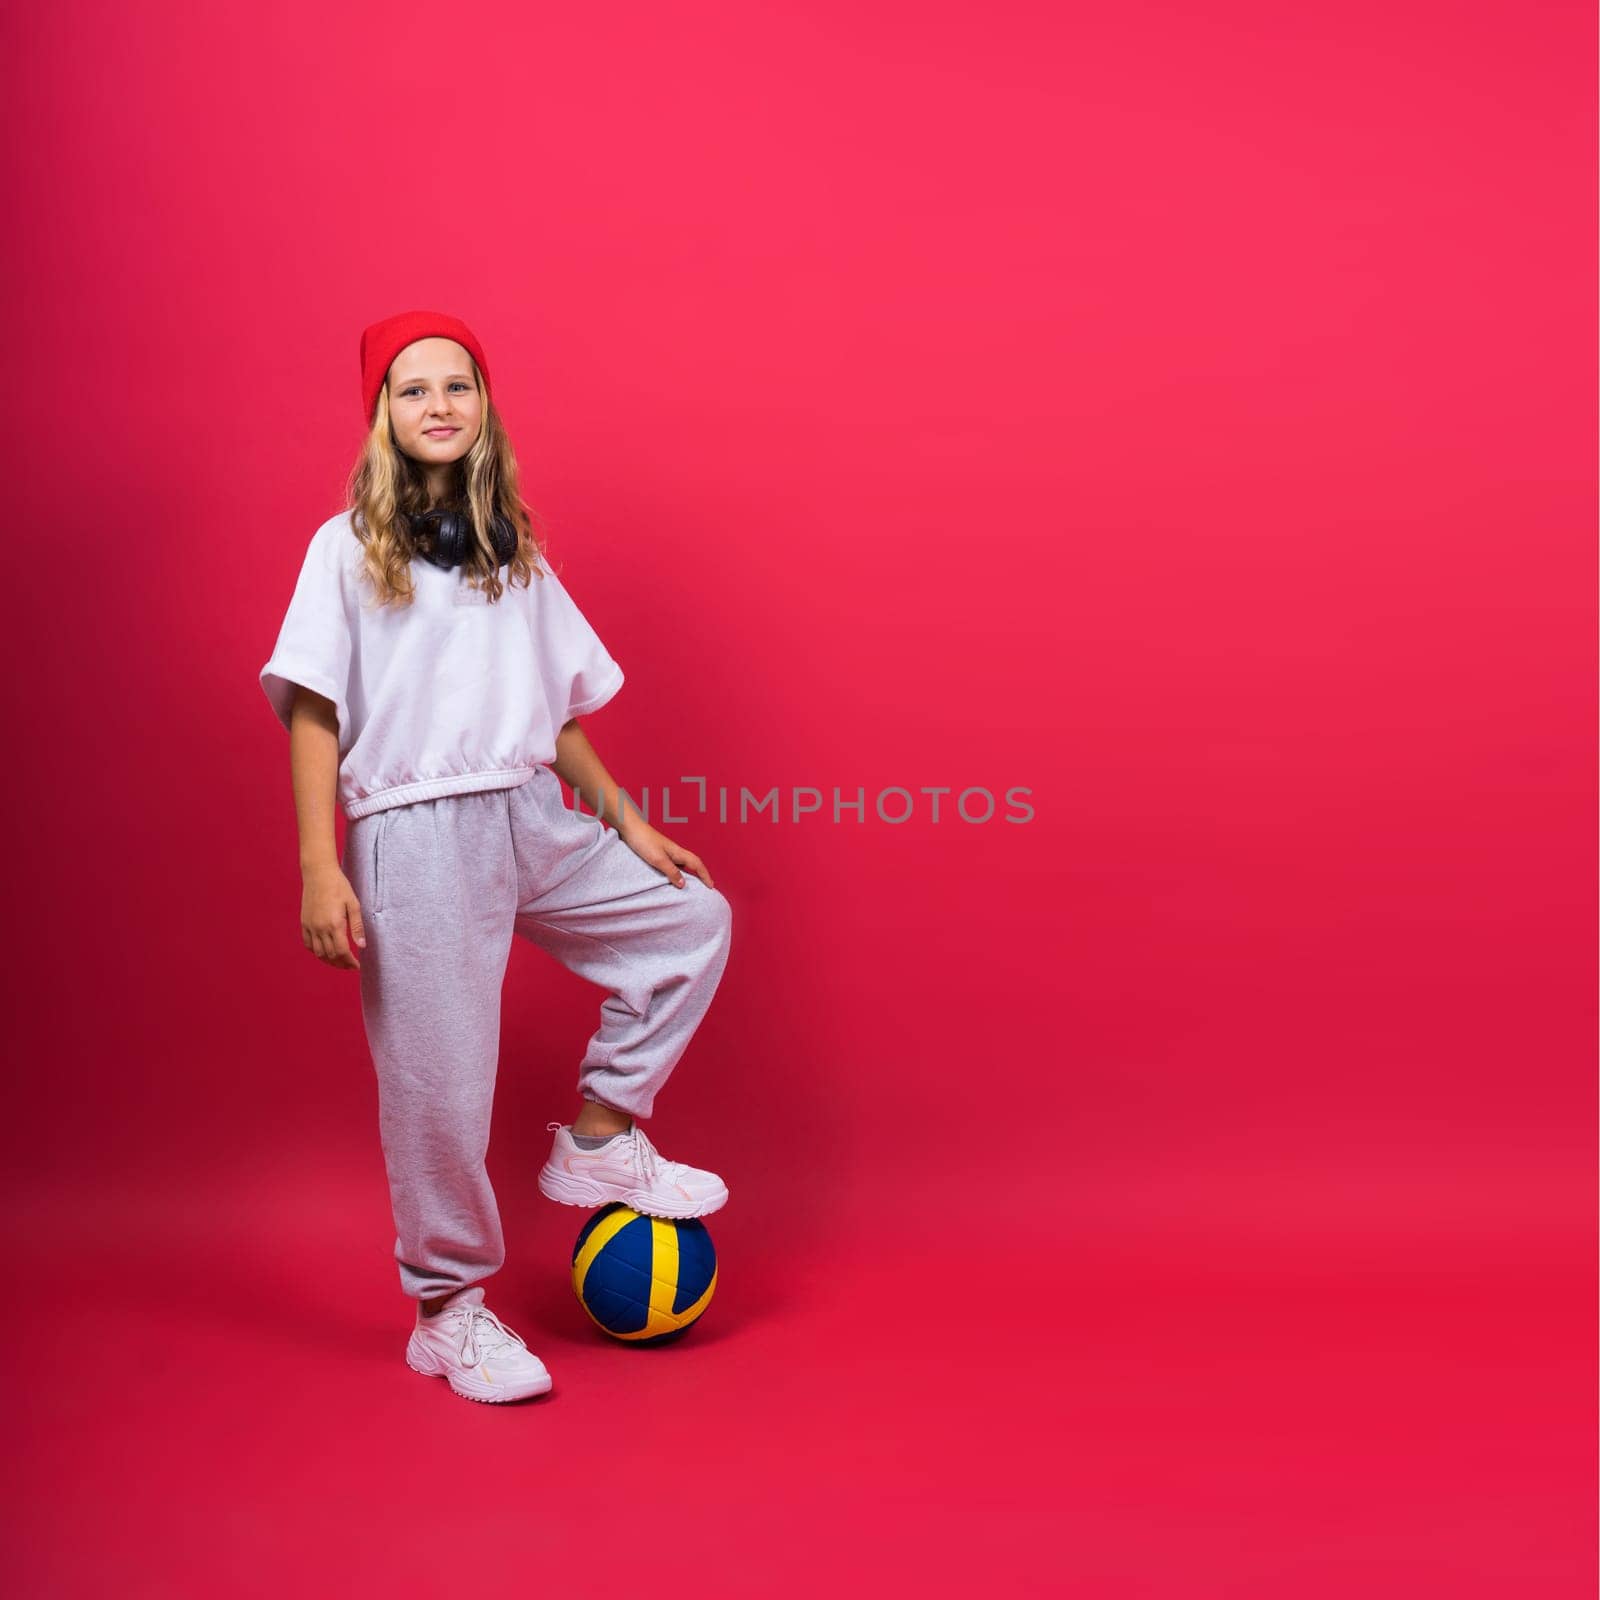 A teenager girl holds volleyball ball in hand and smiles on red yellow background. Studio photo.